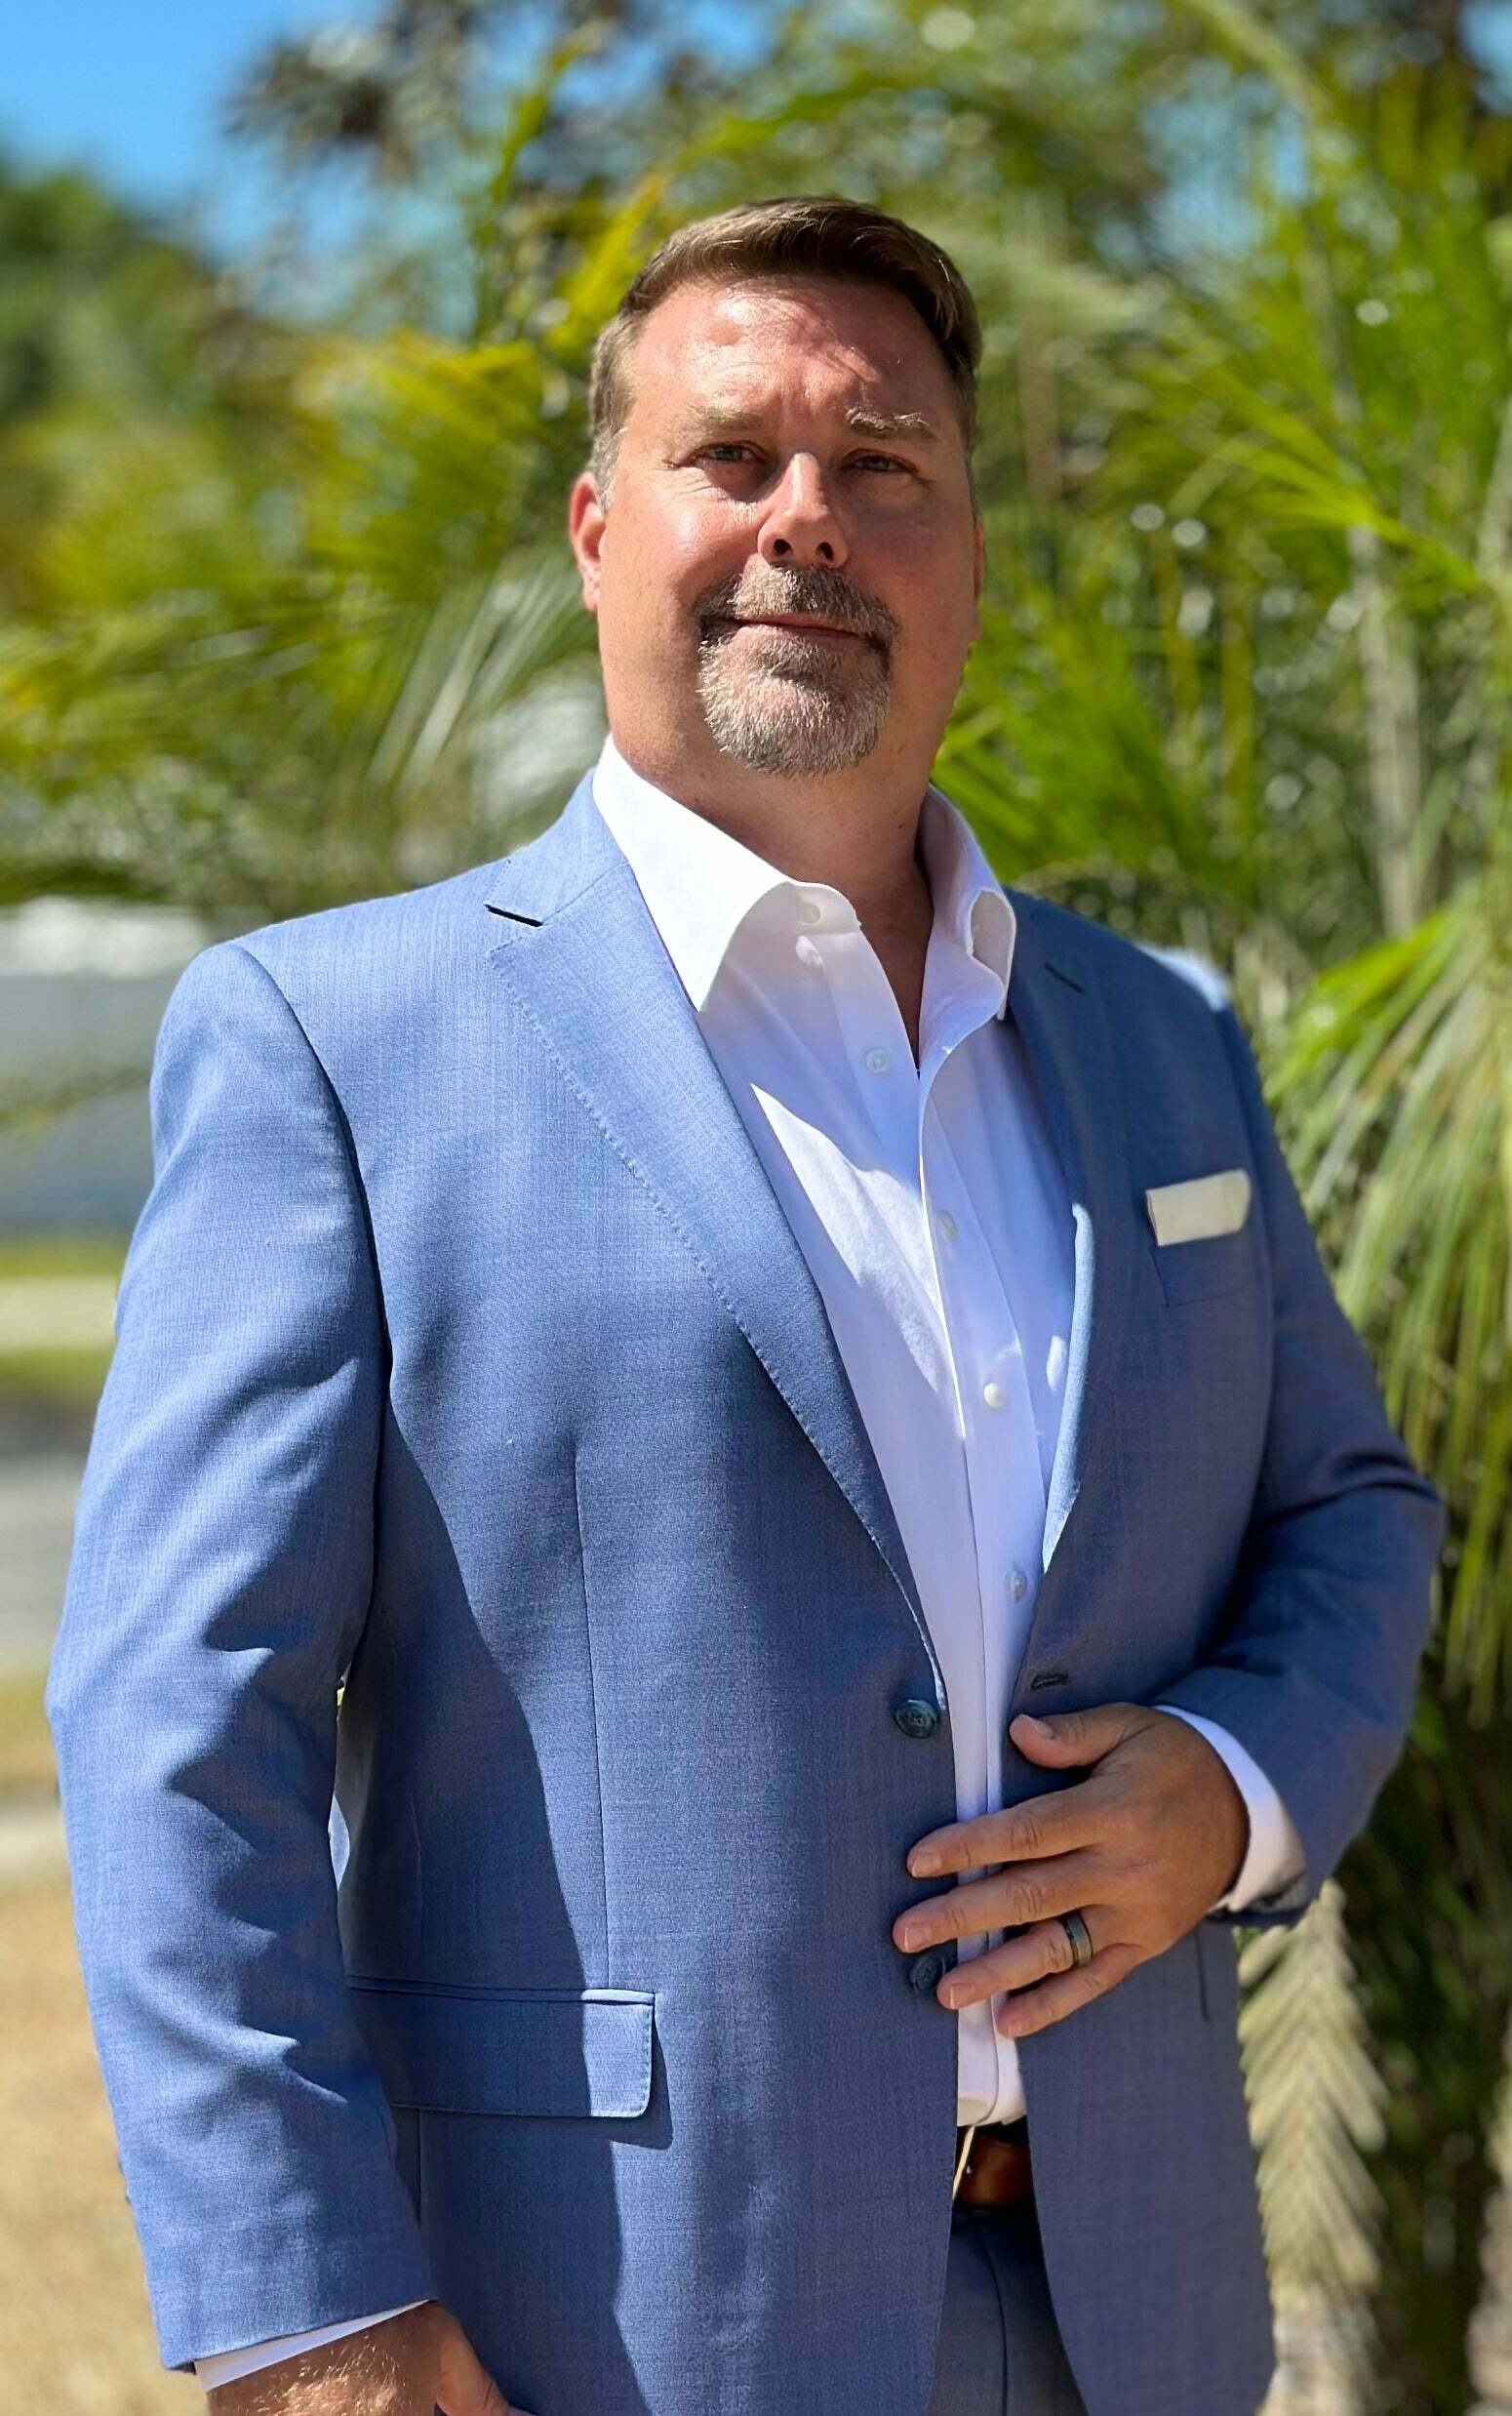 Shannon Martin, Real Estate Salesperson in Lakewood Ranch, Atchley Properties